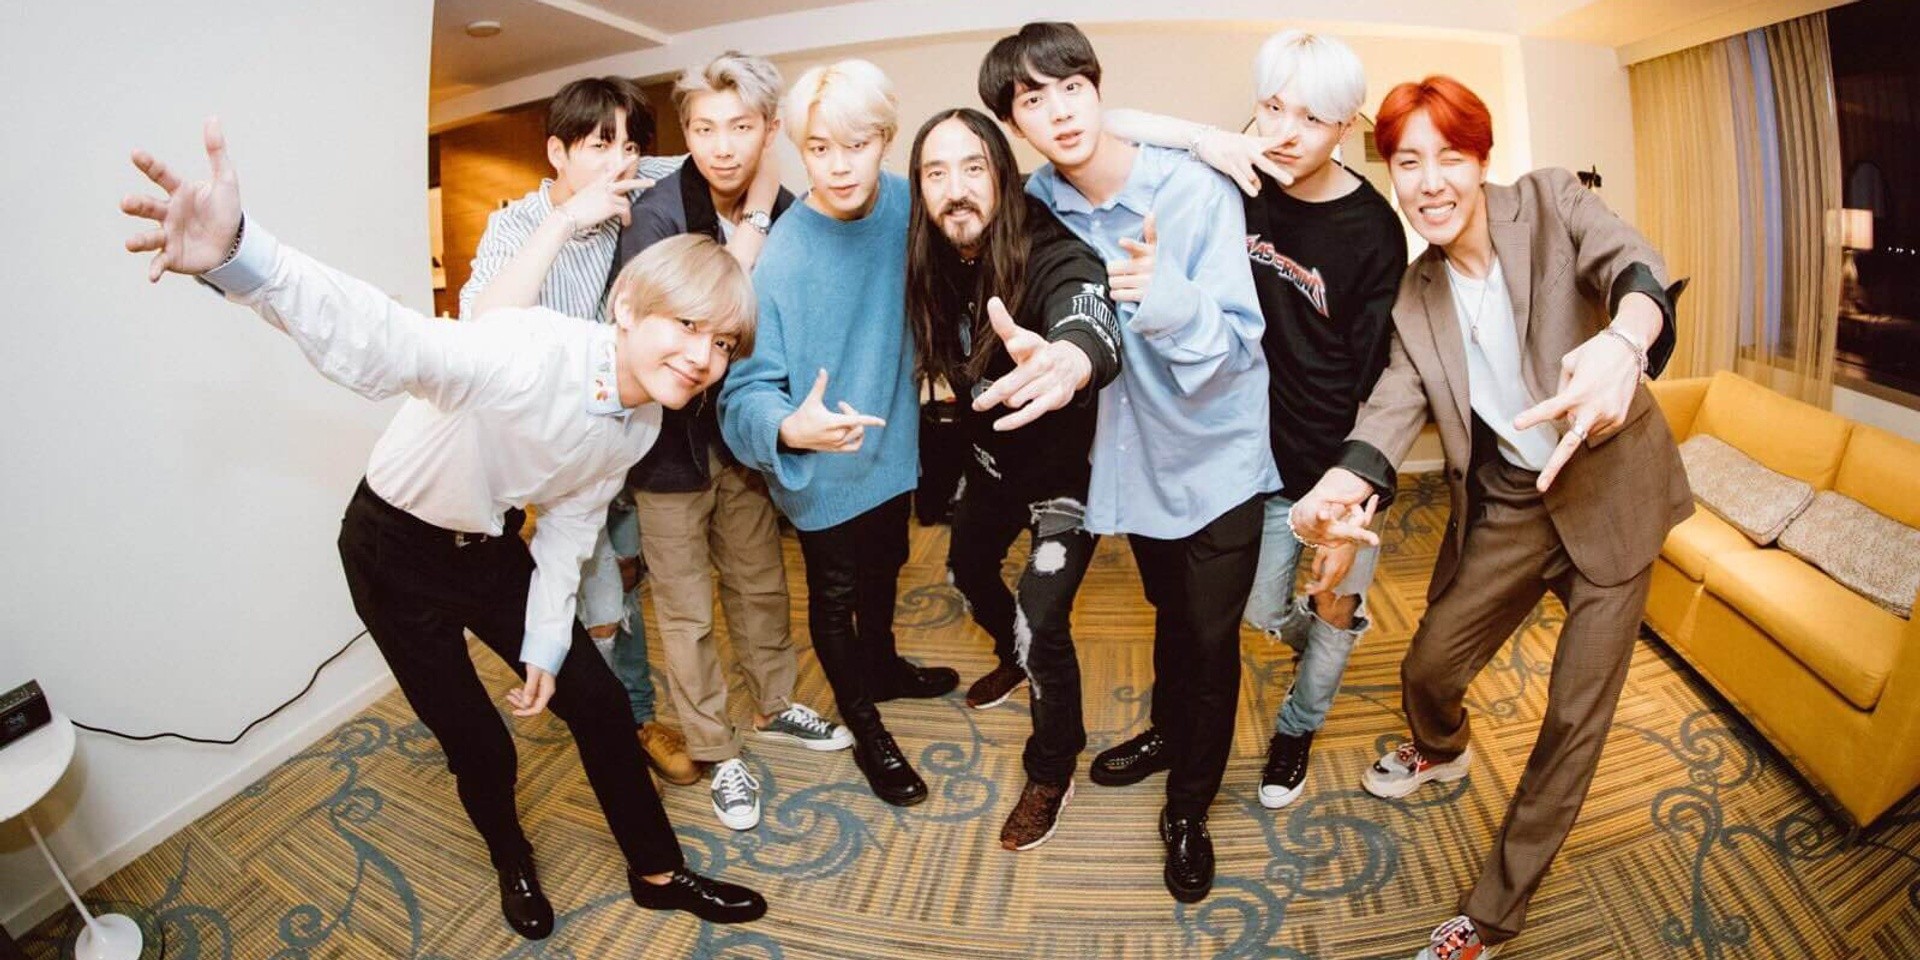 Steve Aoki thanks BTS and fans with Celebration Megamix for 1 billion views of 'Mic Drop' remix on YouTube